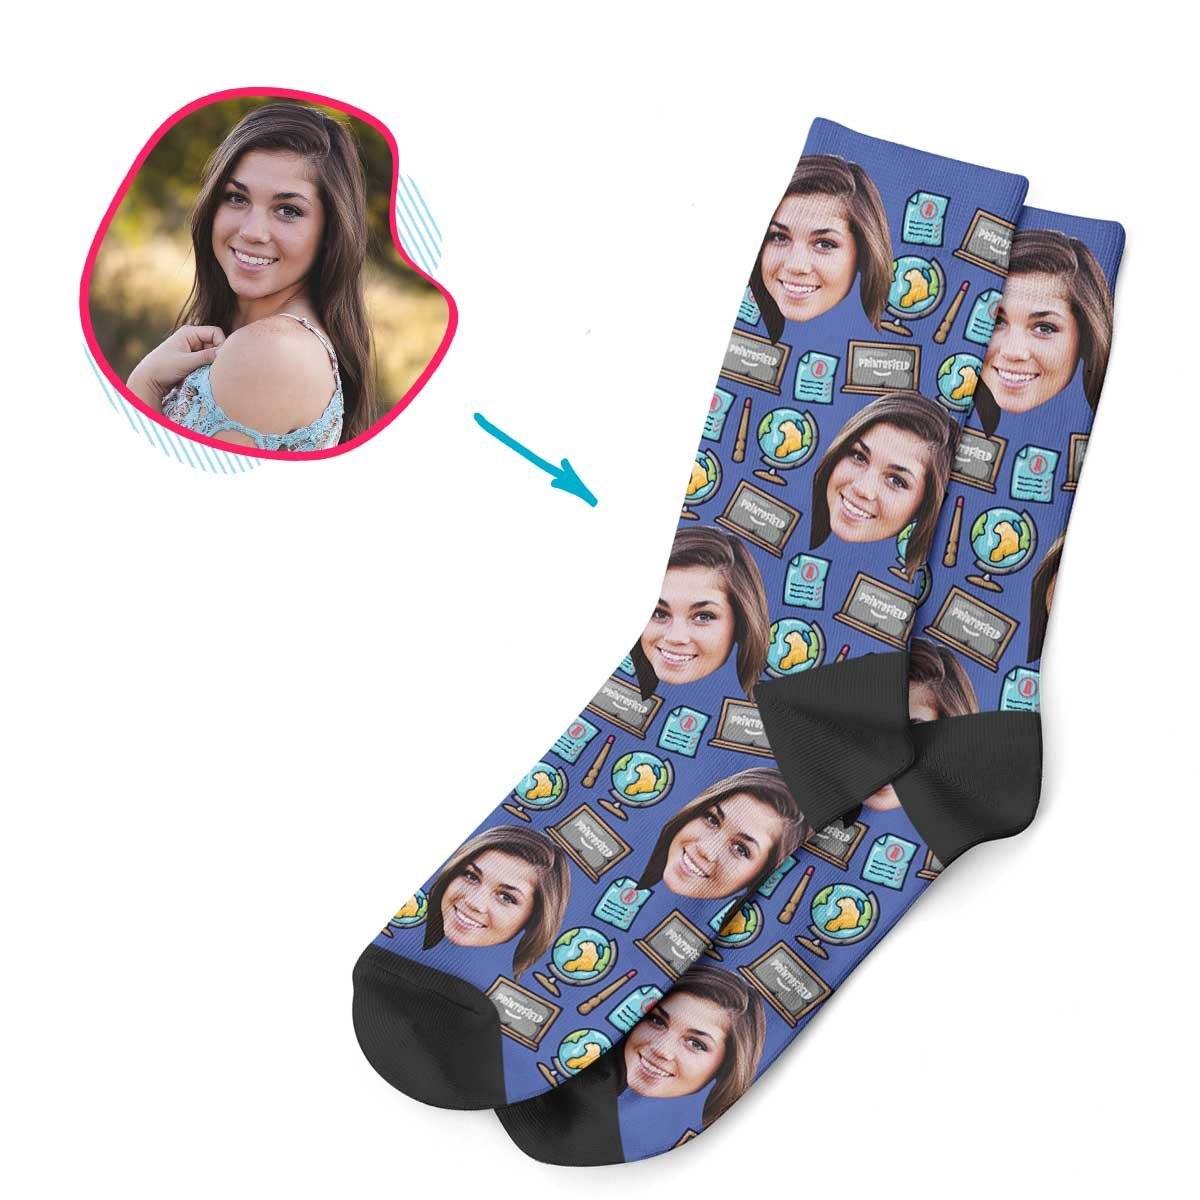 Darkblue Teacher personalized socks with photo of face printed on them